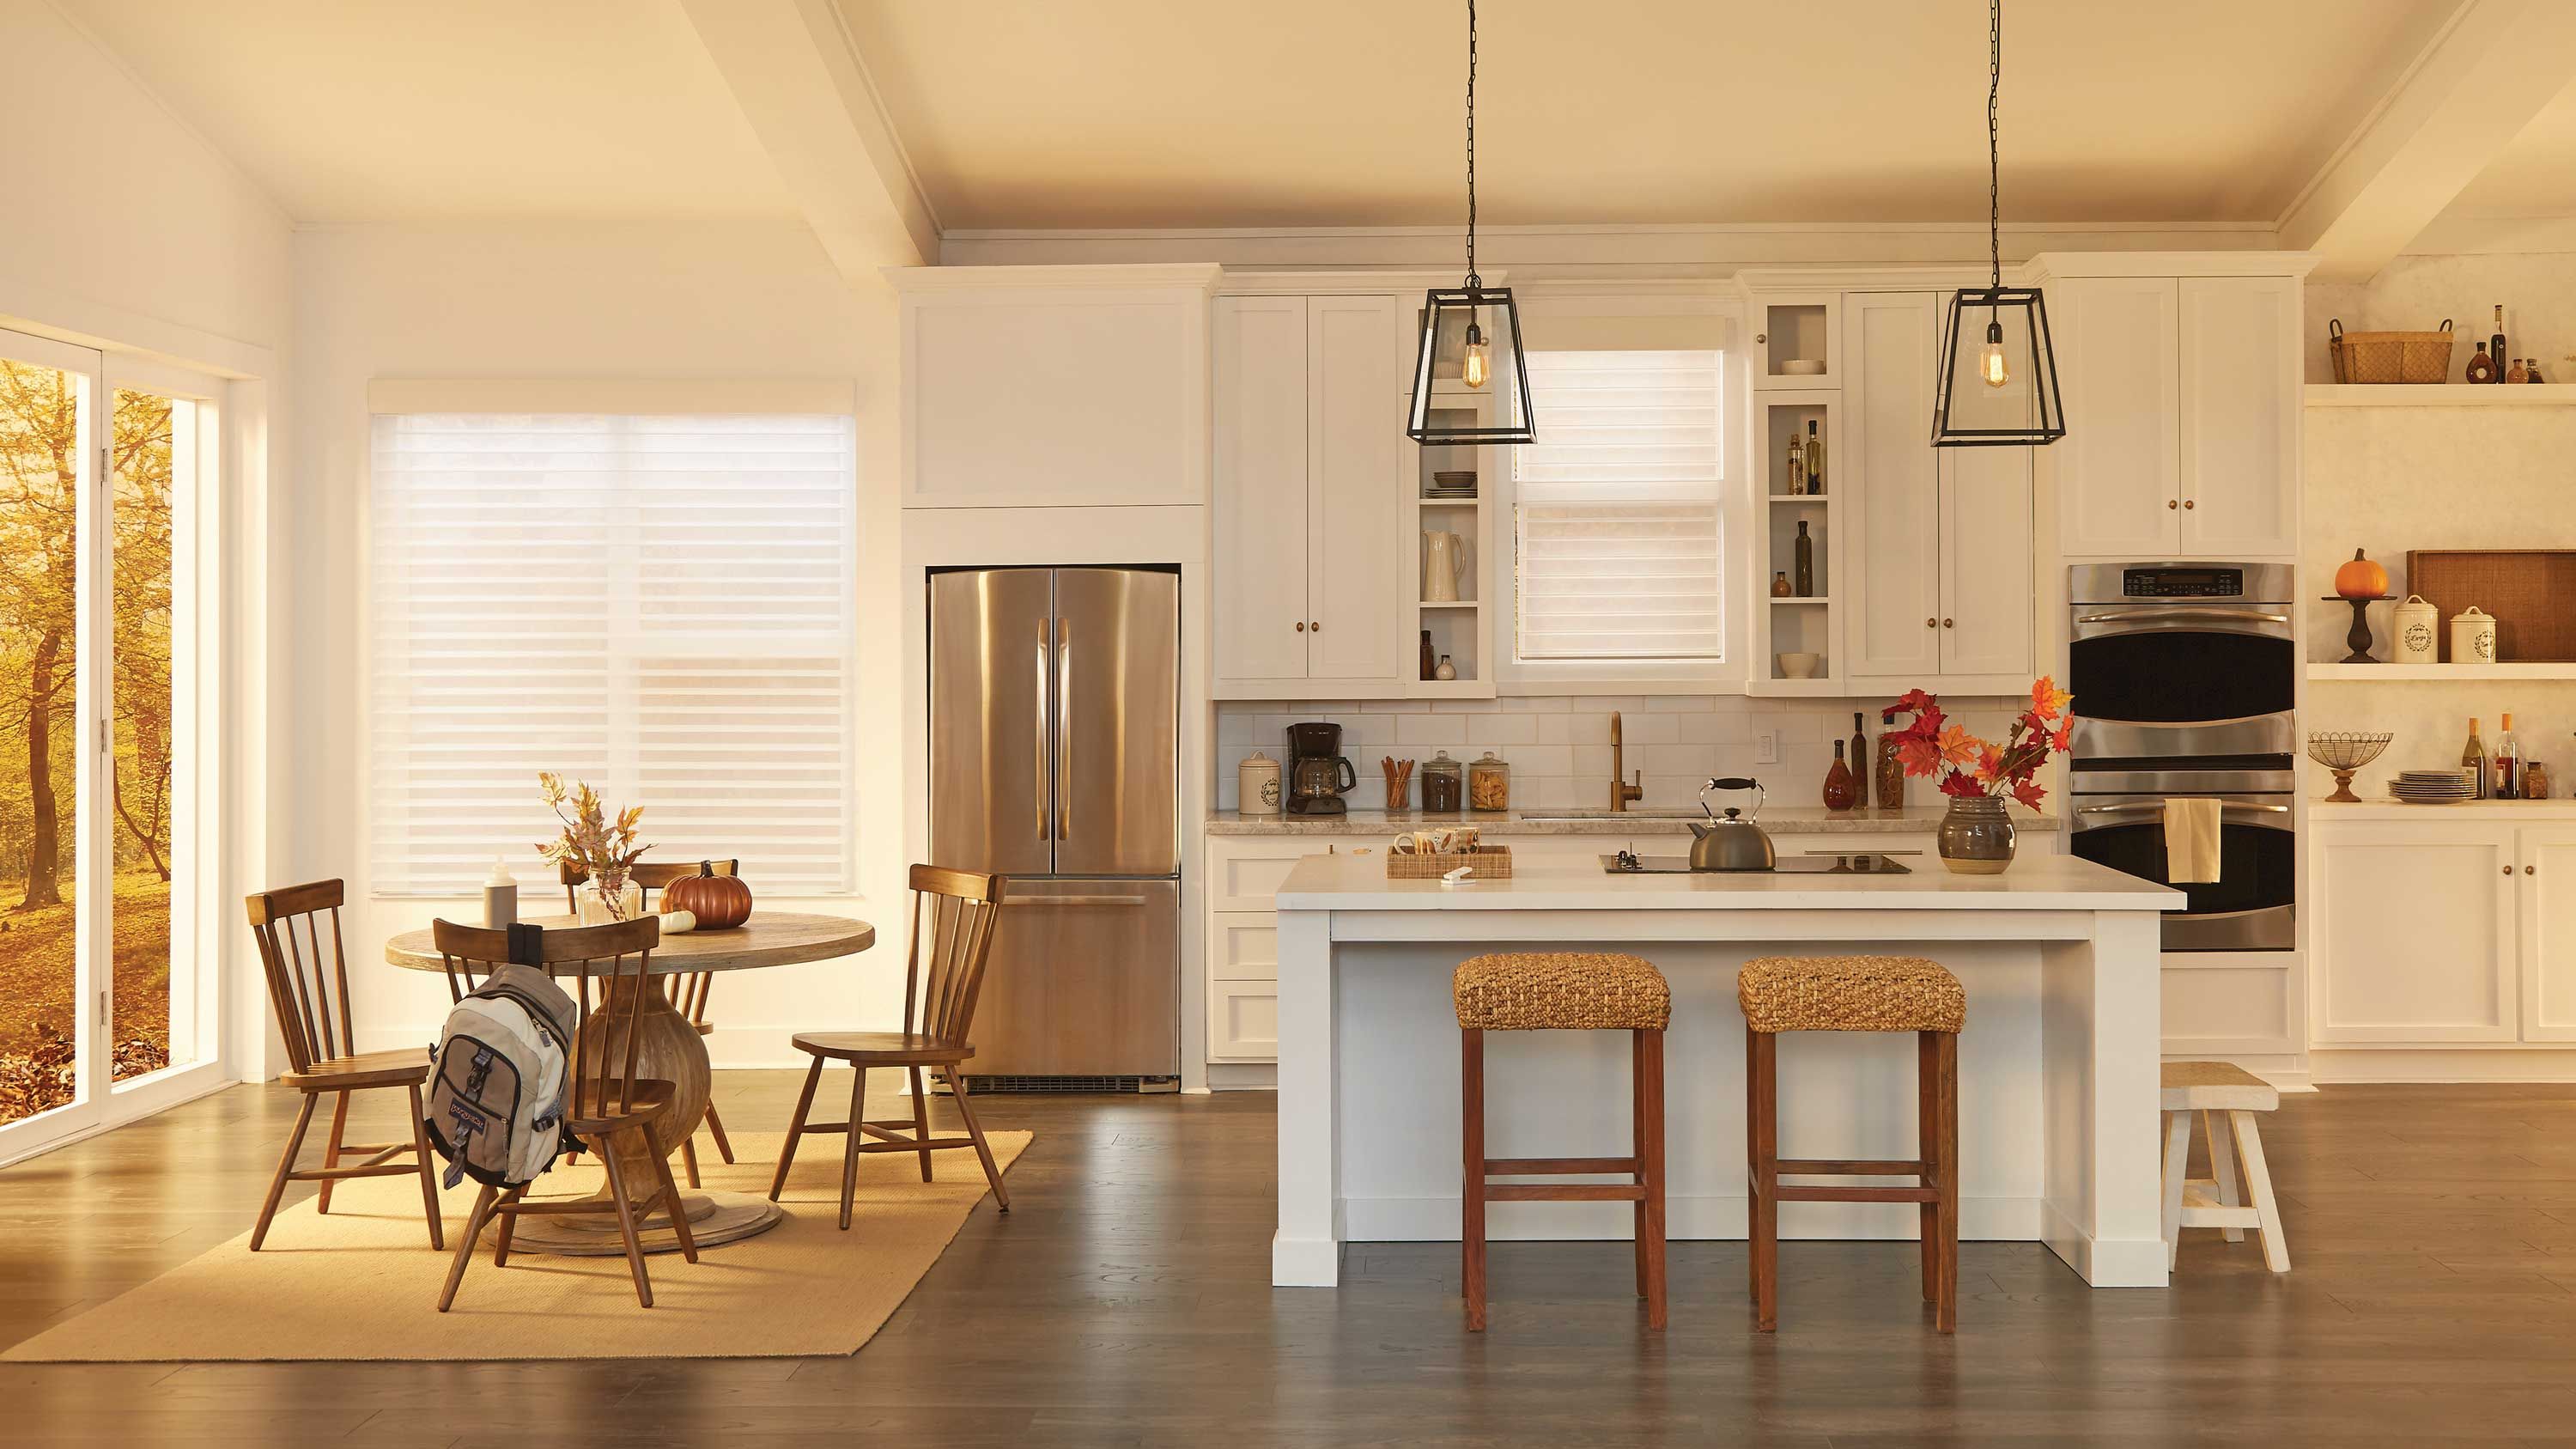 Kitchen, warm lighting, lighting, table, home automation